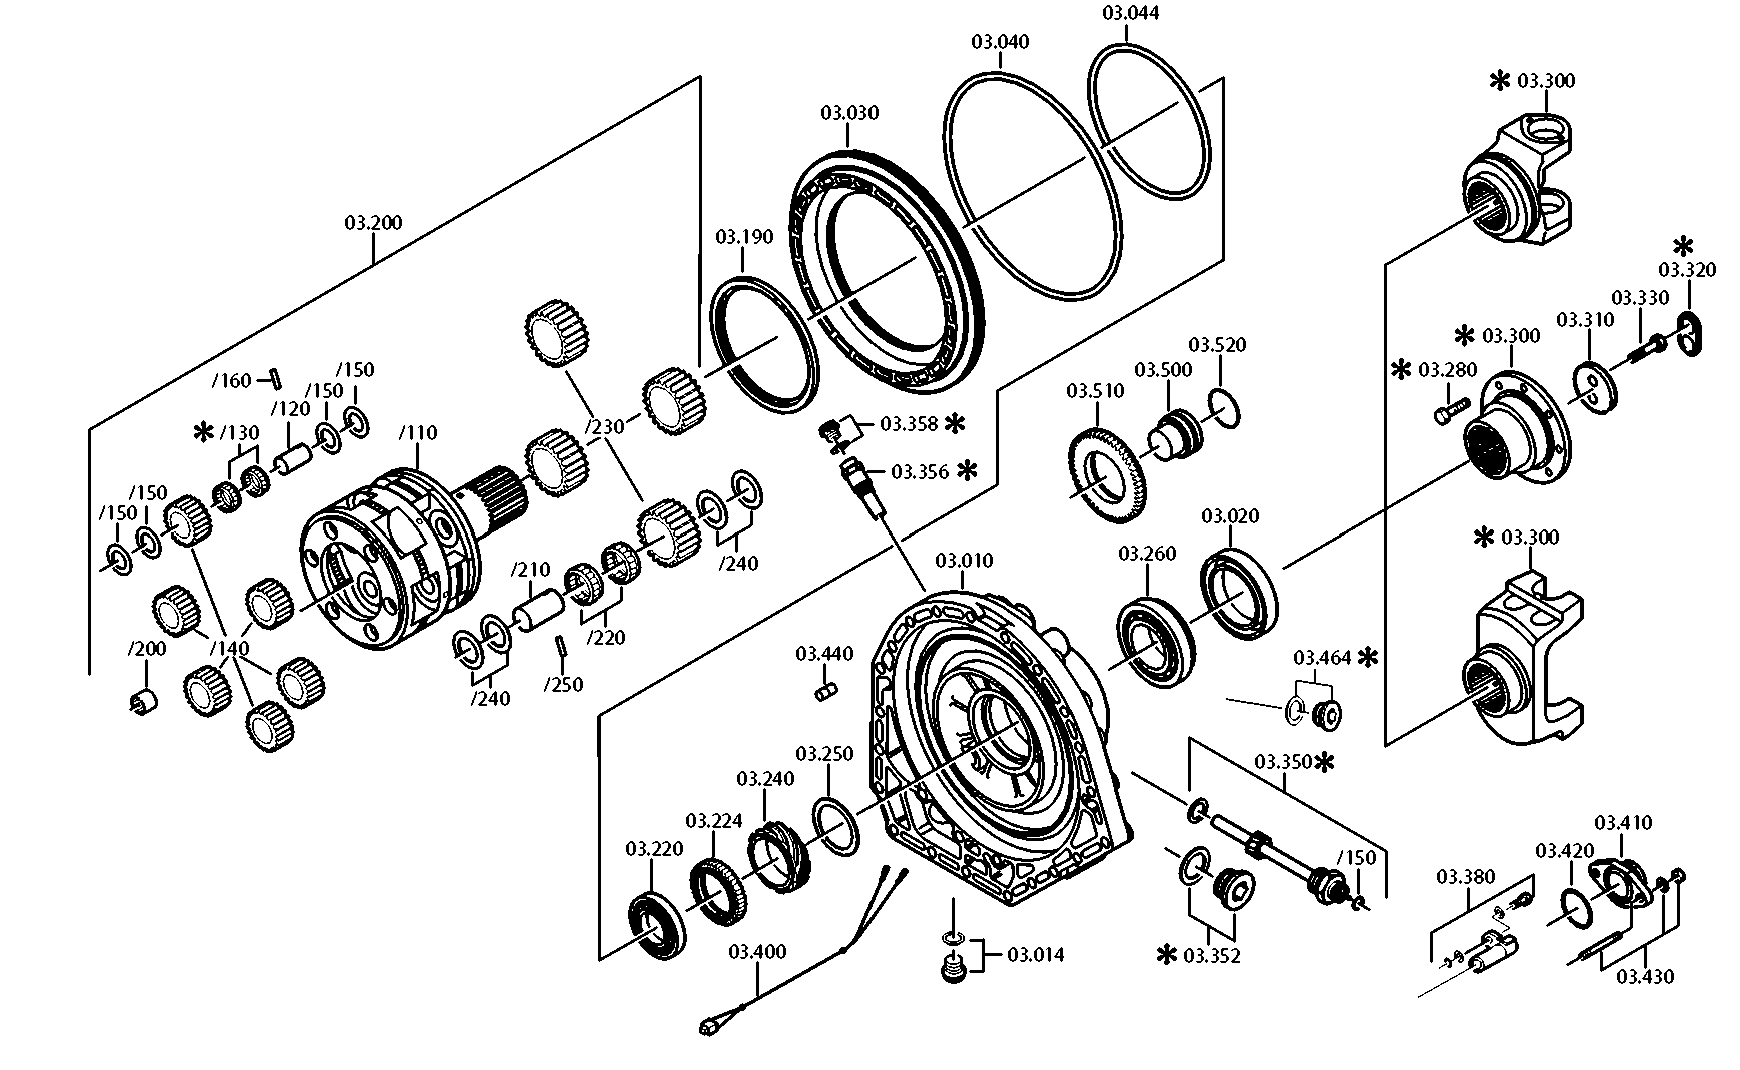 drawing for MOXY TRUCKS AS 252622 - AXIAL WASHER (figure 2)